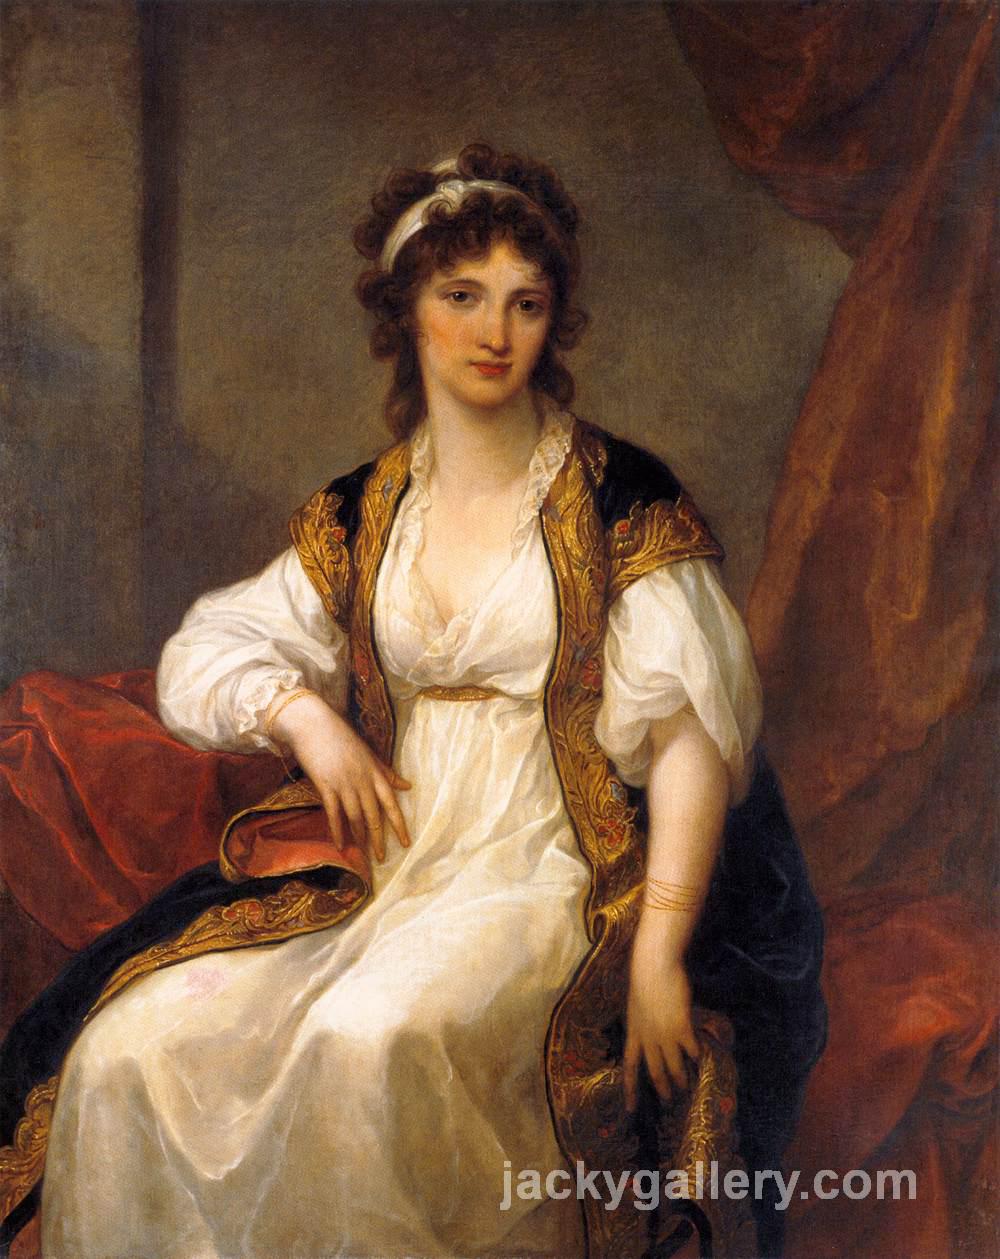 Portrait of a Young Woman, Angelica Kauffman painting